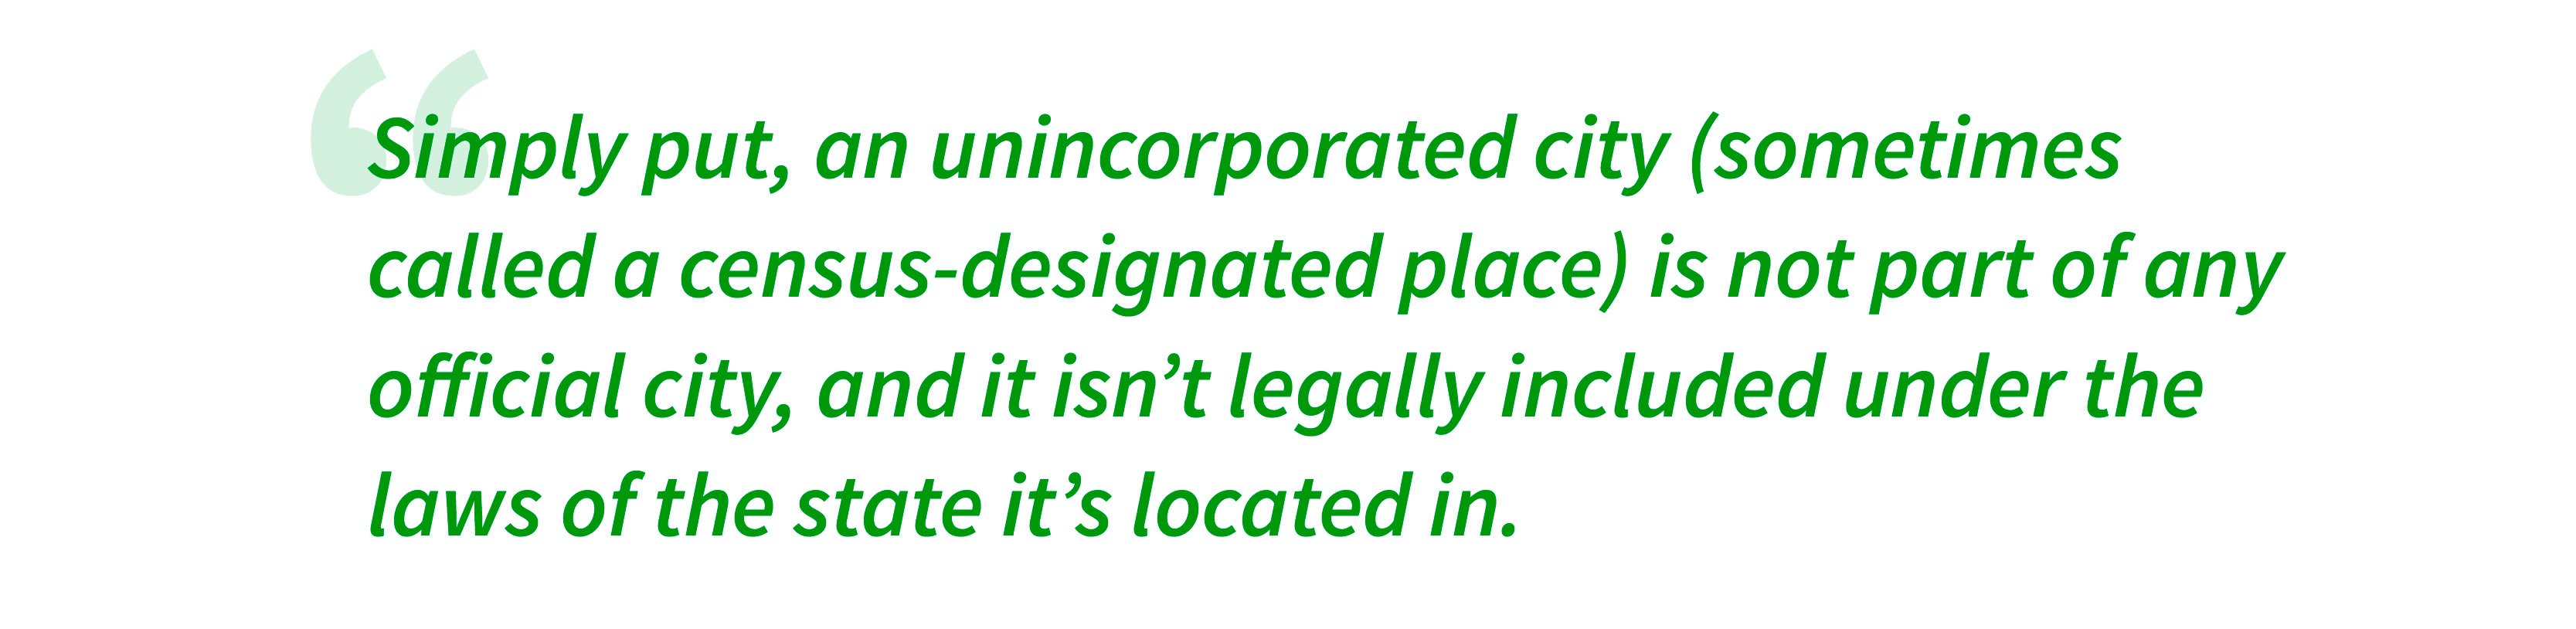 Simply put, an unincorporated city (sometimes called a census-designated place) is not part of any official city, and it isn’t legally included under the laws of the state it’s located in. 